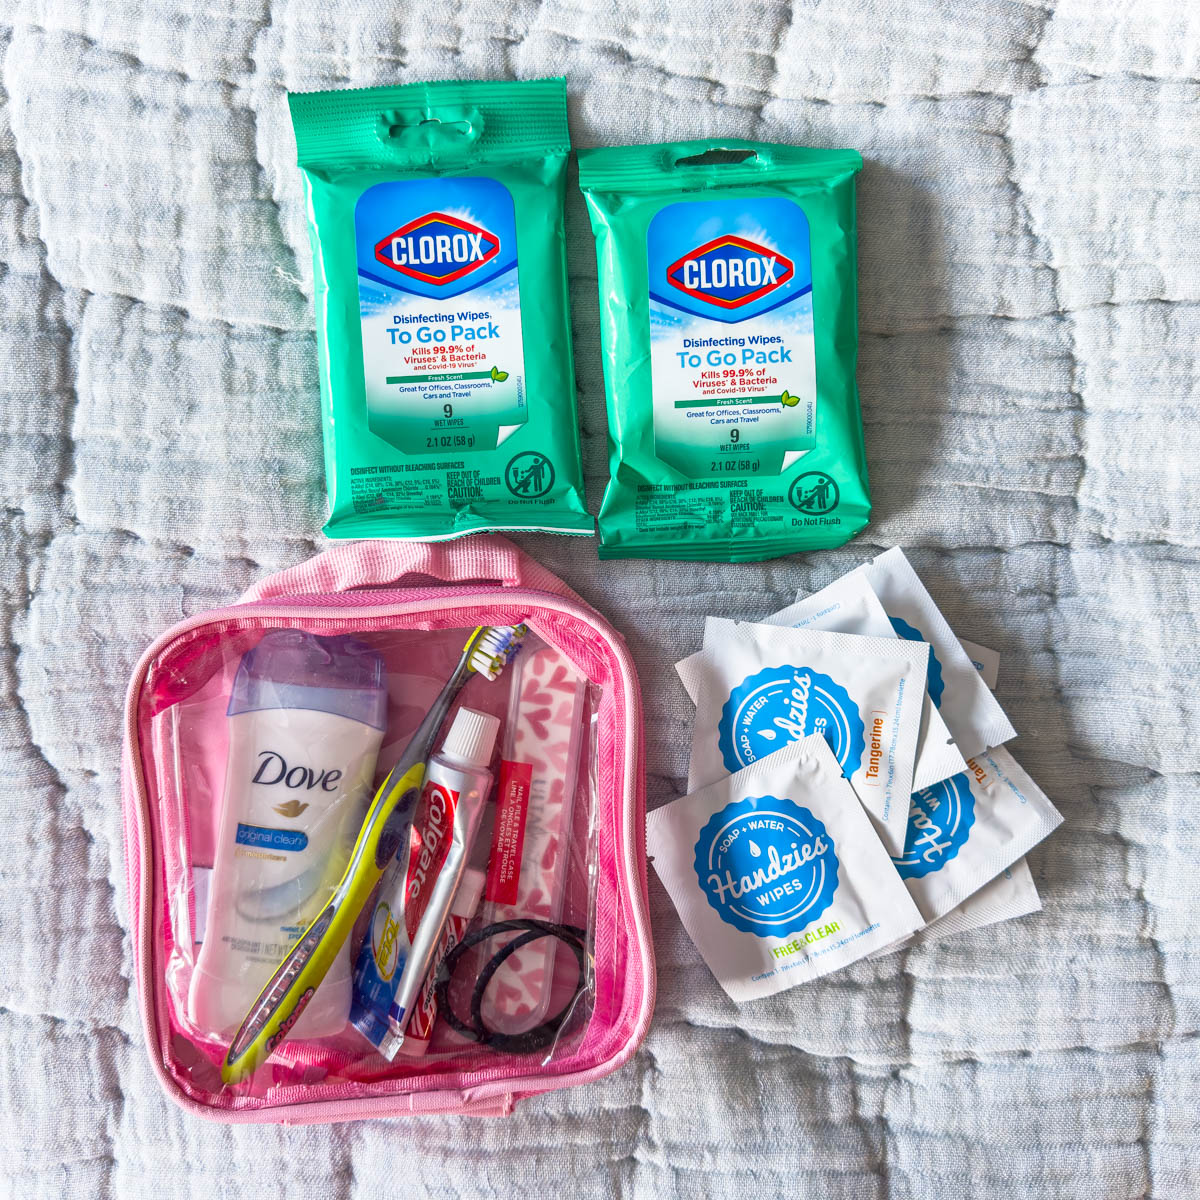 Hand wipes and a personal items container.